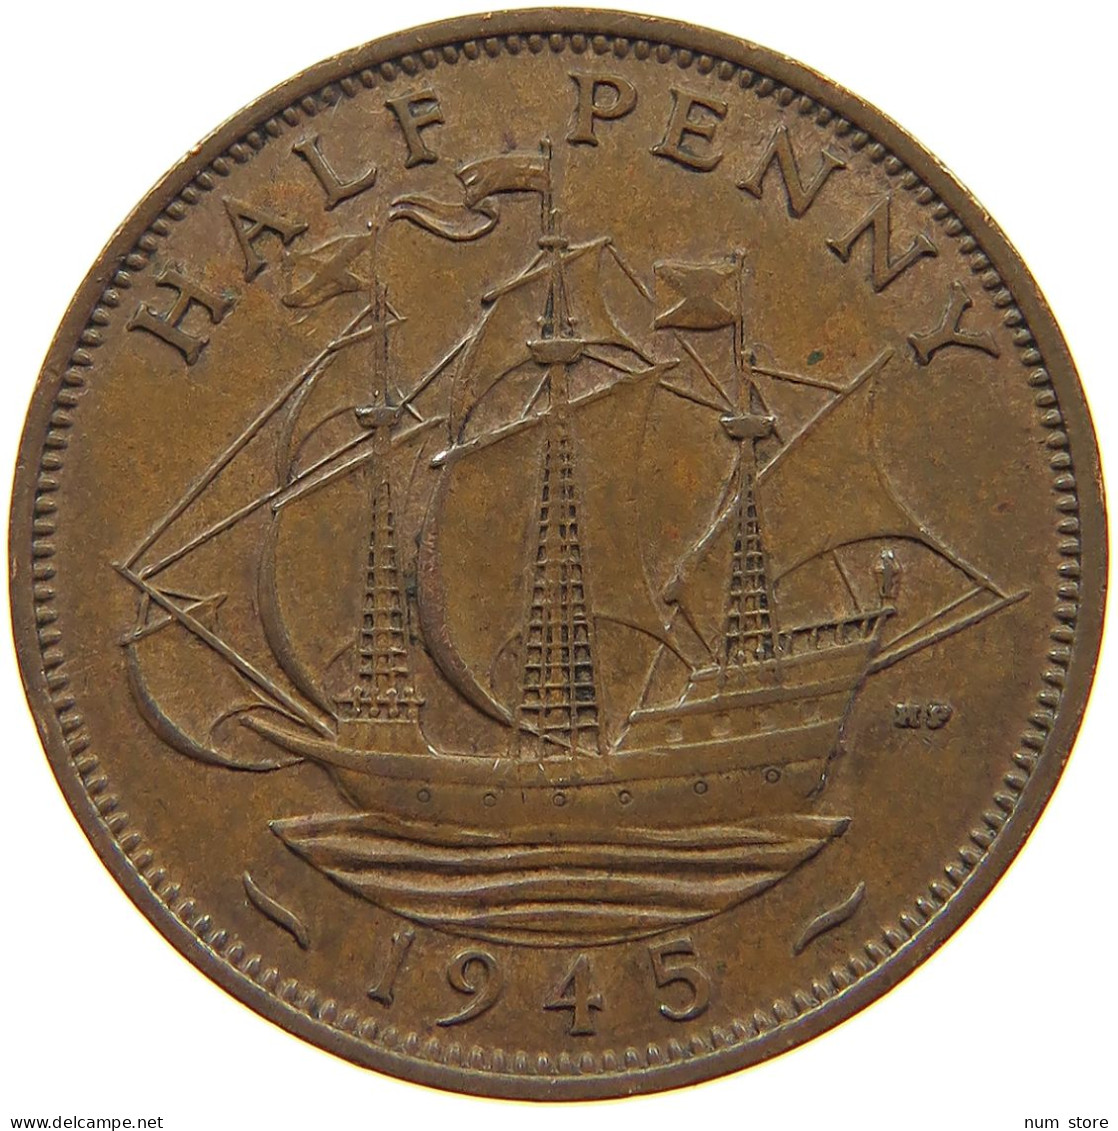 GREAT BRITAIN HALFPENNY 1945 #a066 0231 - C. 1/2 Penny